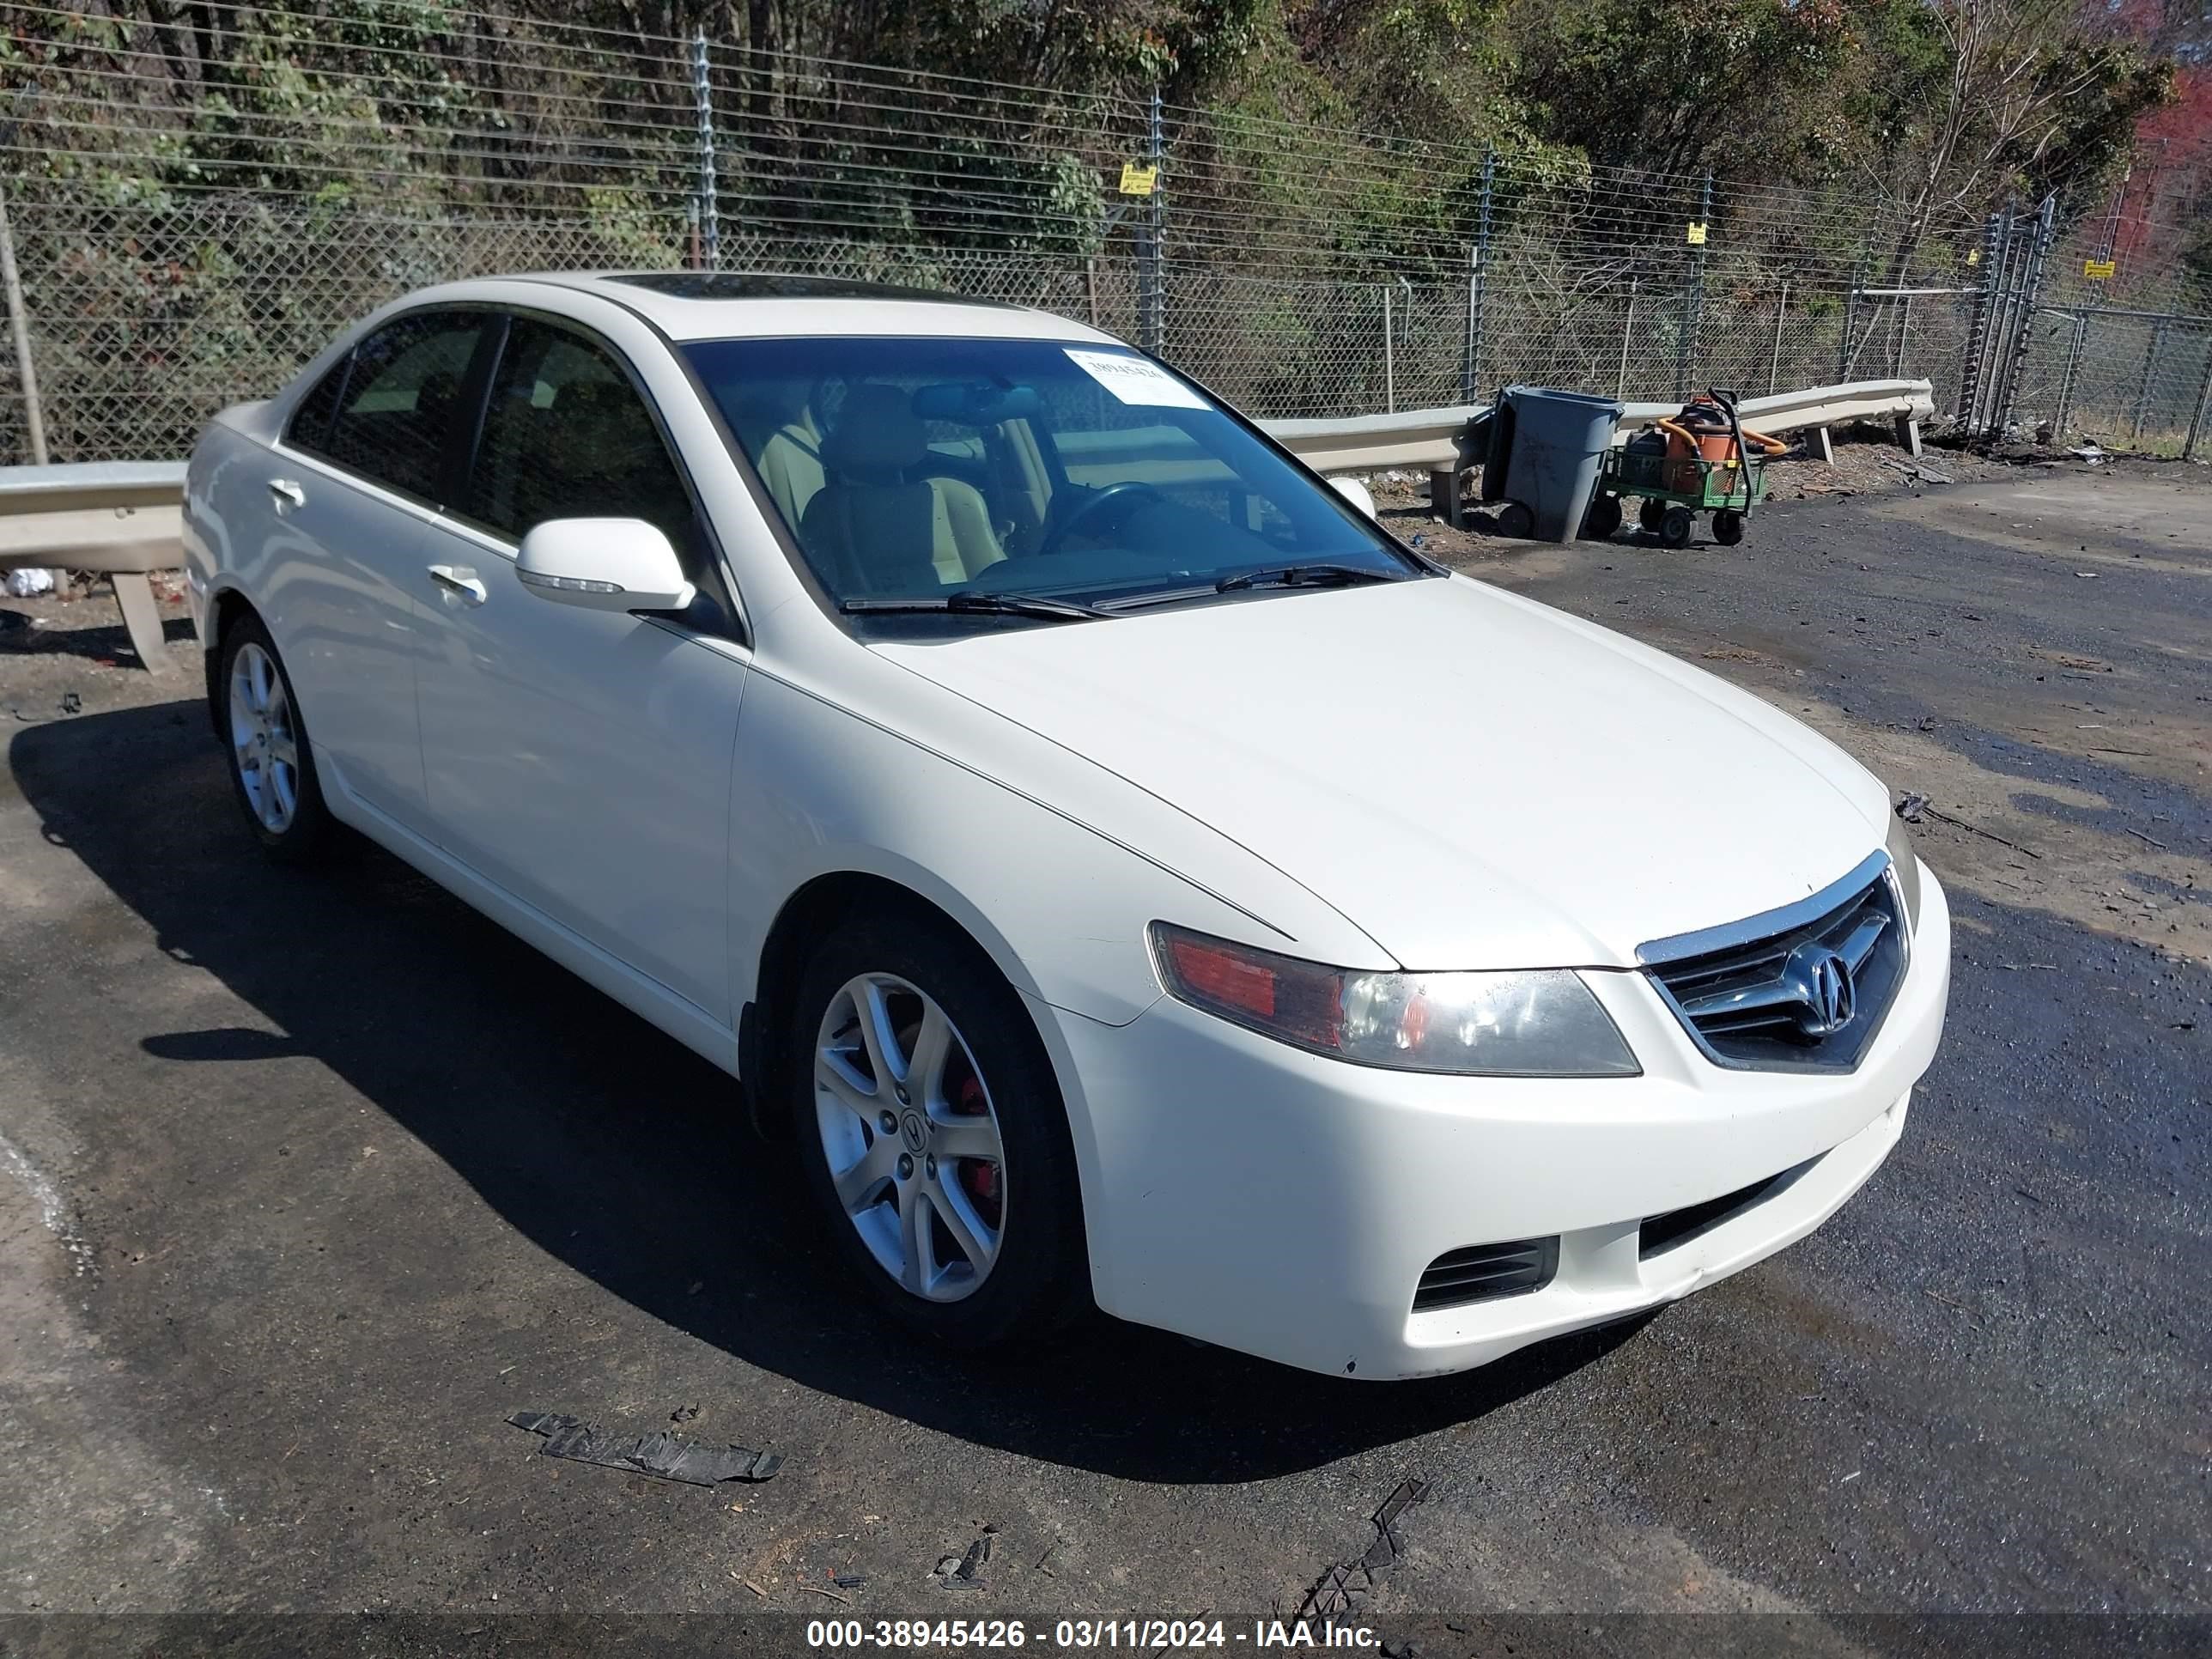 vin: JH4CL96895C029569 JH4CL96895C029569 2005 acura tsx 2400 for Sale in 27253, 171 Carden Road, Graham, North Carolina, USA